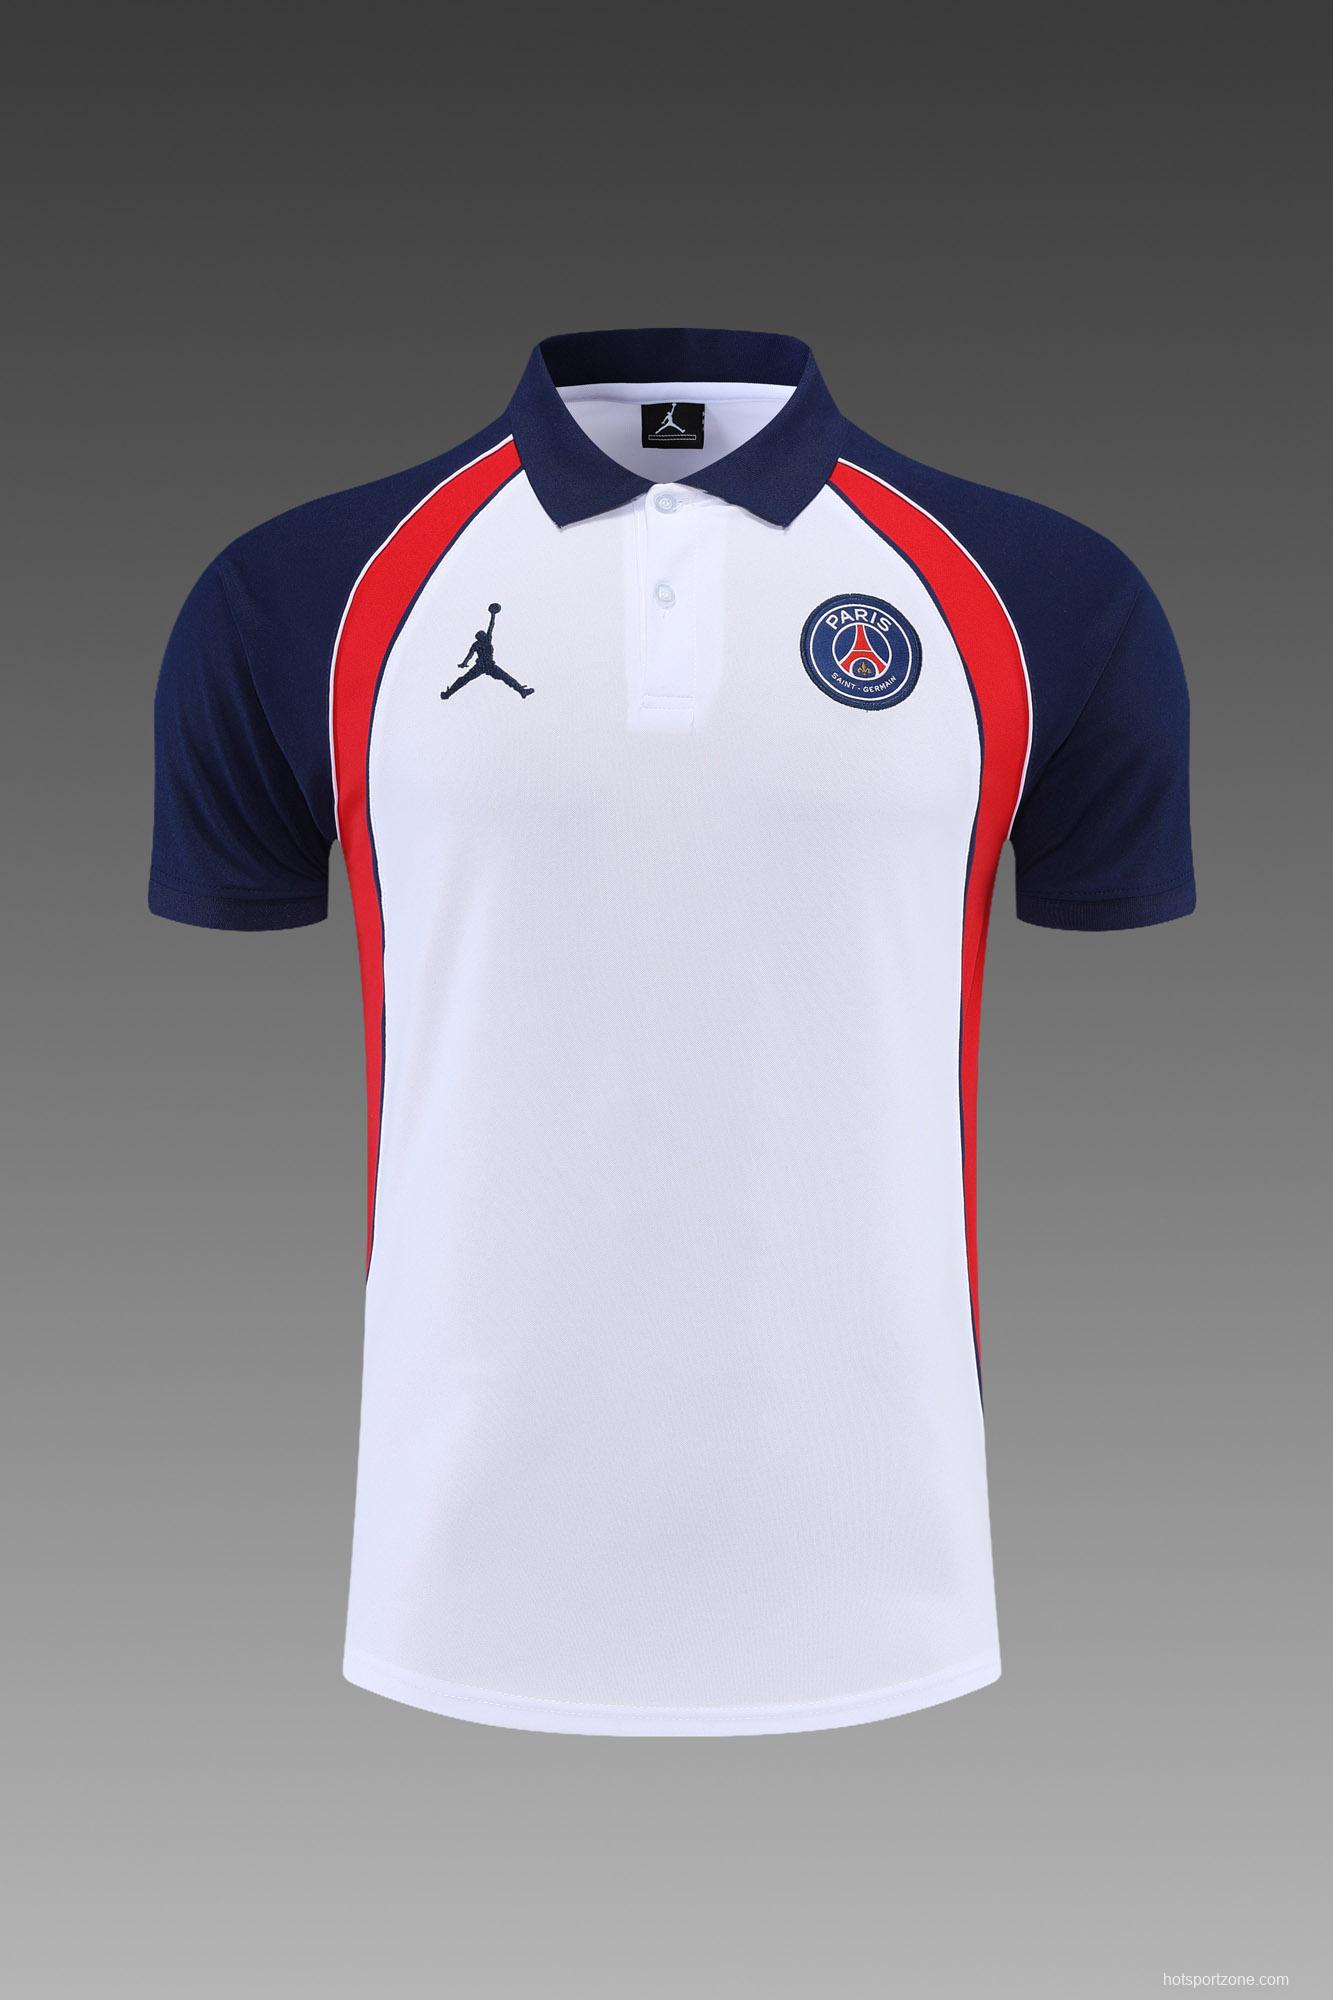 PSG X Jordan POLO kit white and red edge (not supported to be sold separately)